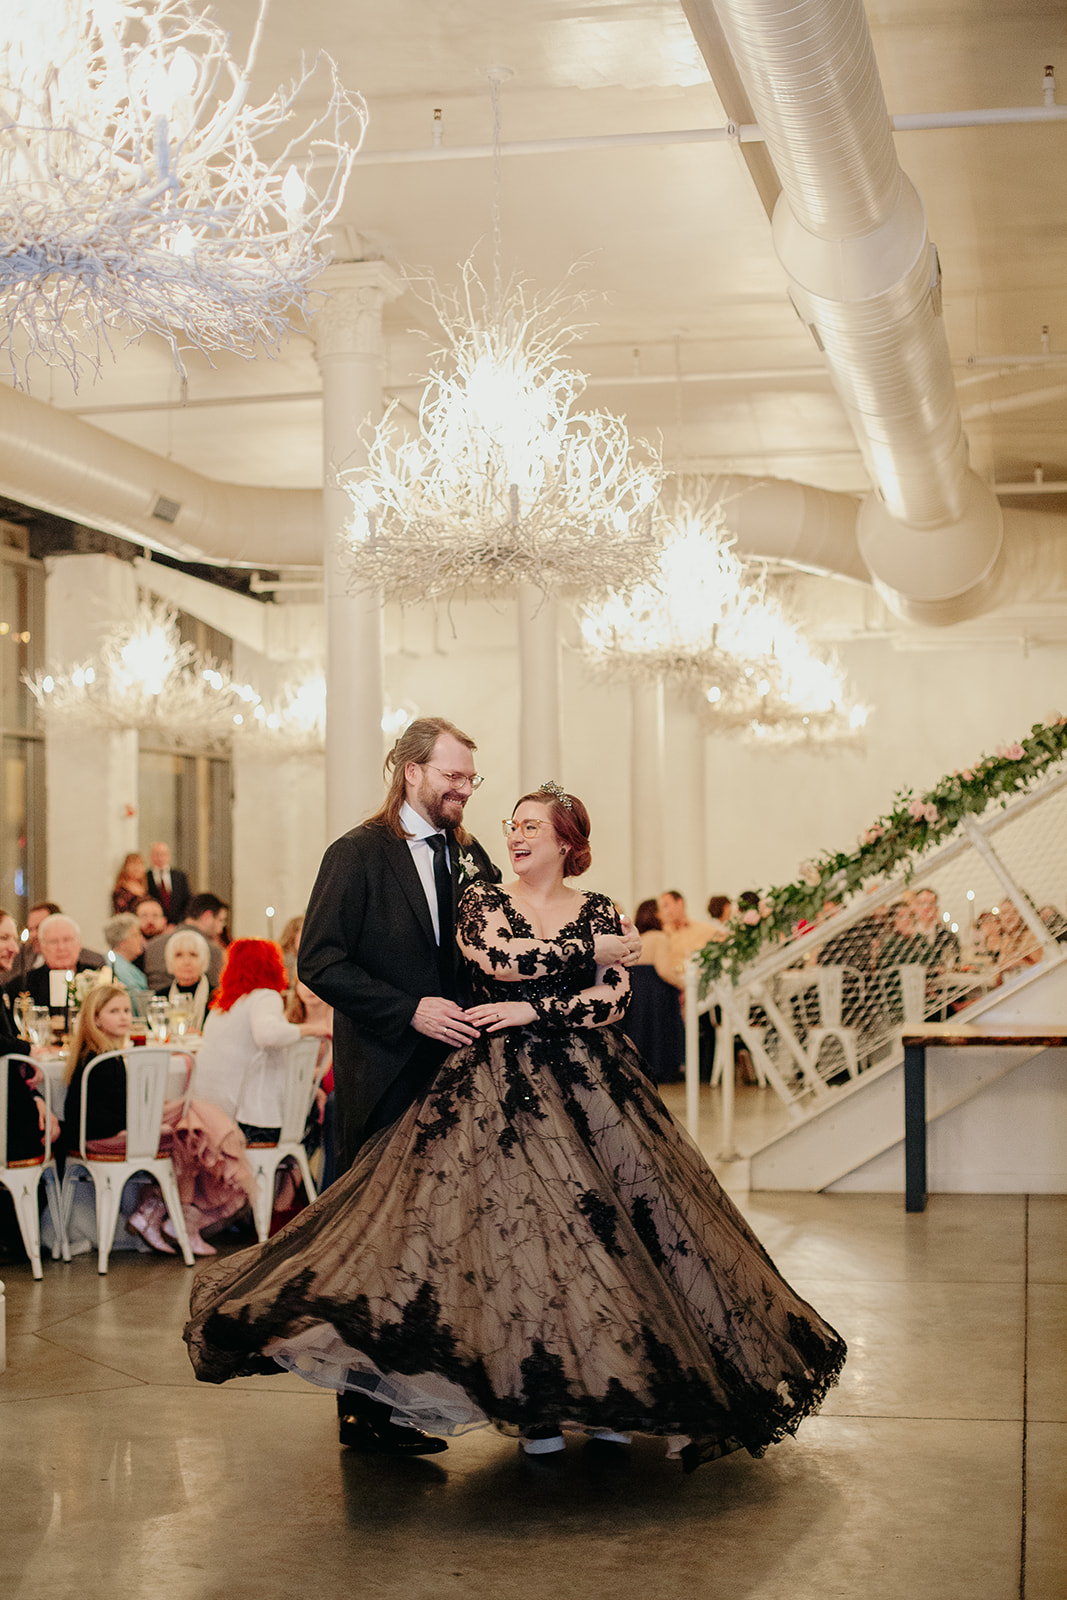 A whimsical couple shares their first dance as husband & wife